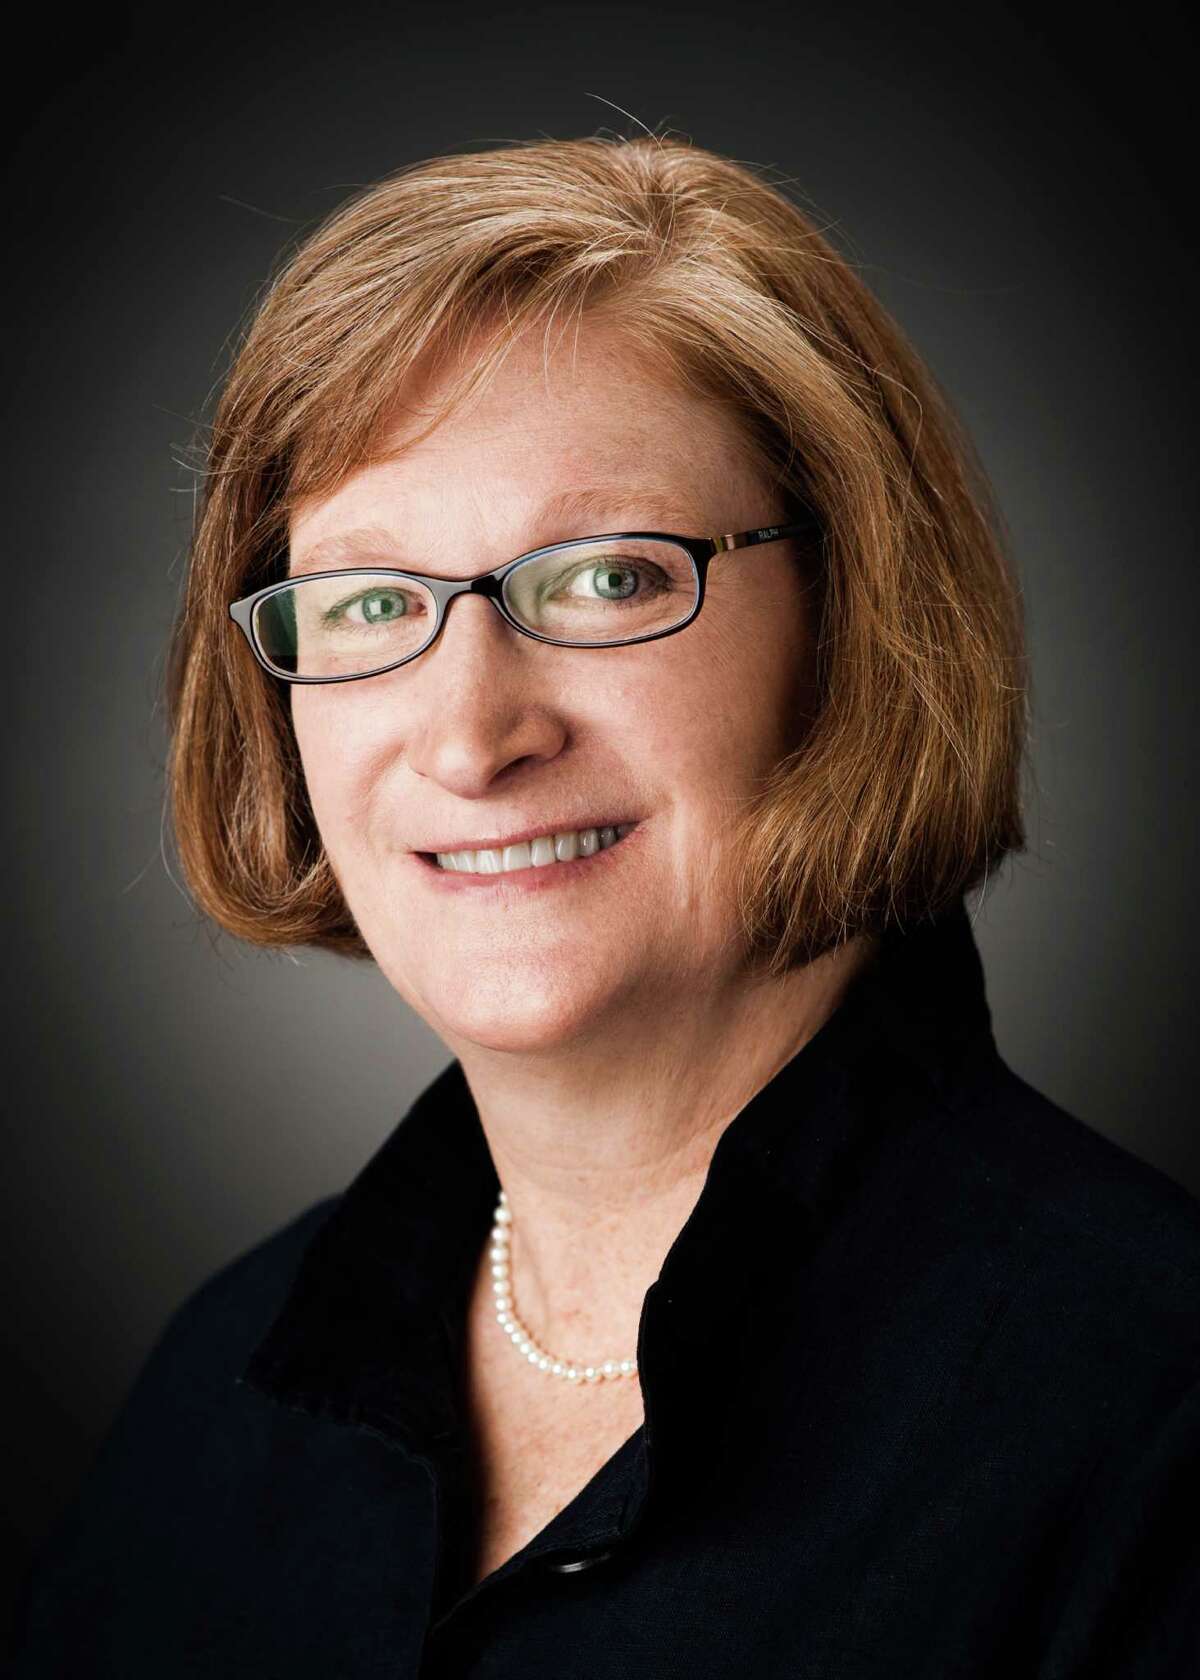 Dr. Sally E. Taylor is senior vice president and chief of behavioral medicine at University Health System.